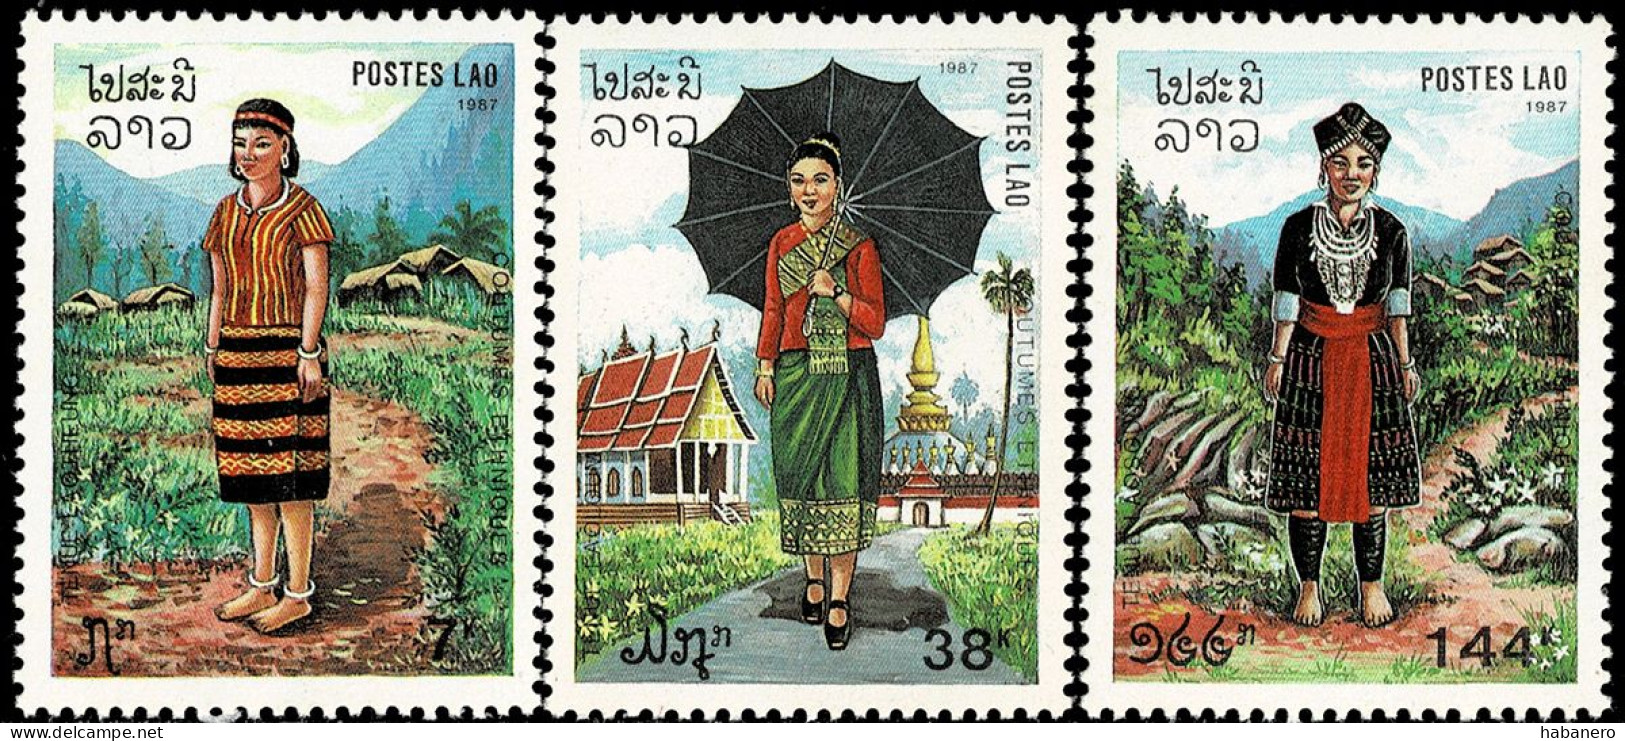 LAOS 1987 Mi 1057-1059 ETHNIC PEOPLE AND COSTUMES MINT STAMPS ** - Laos